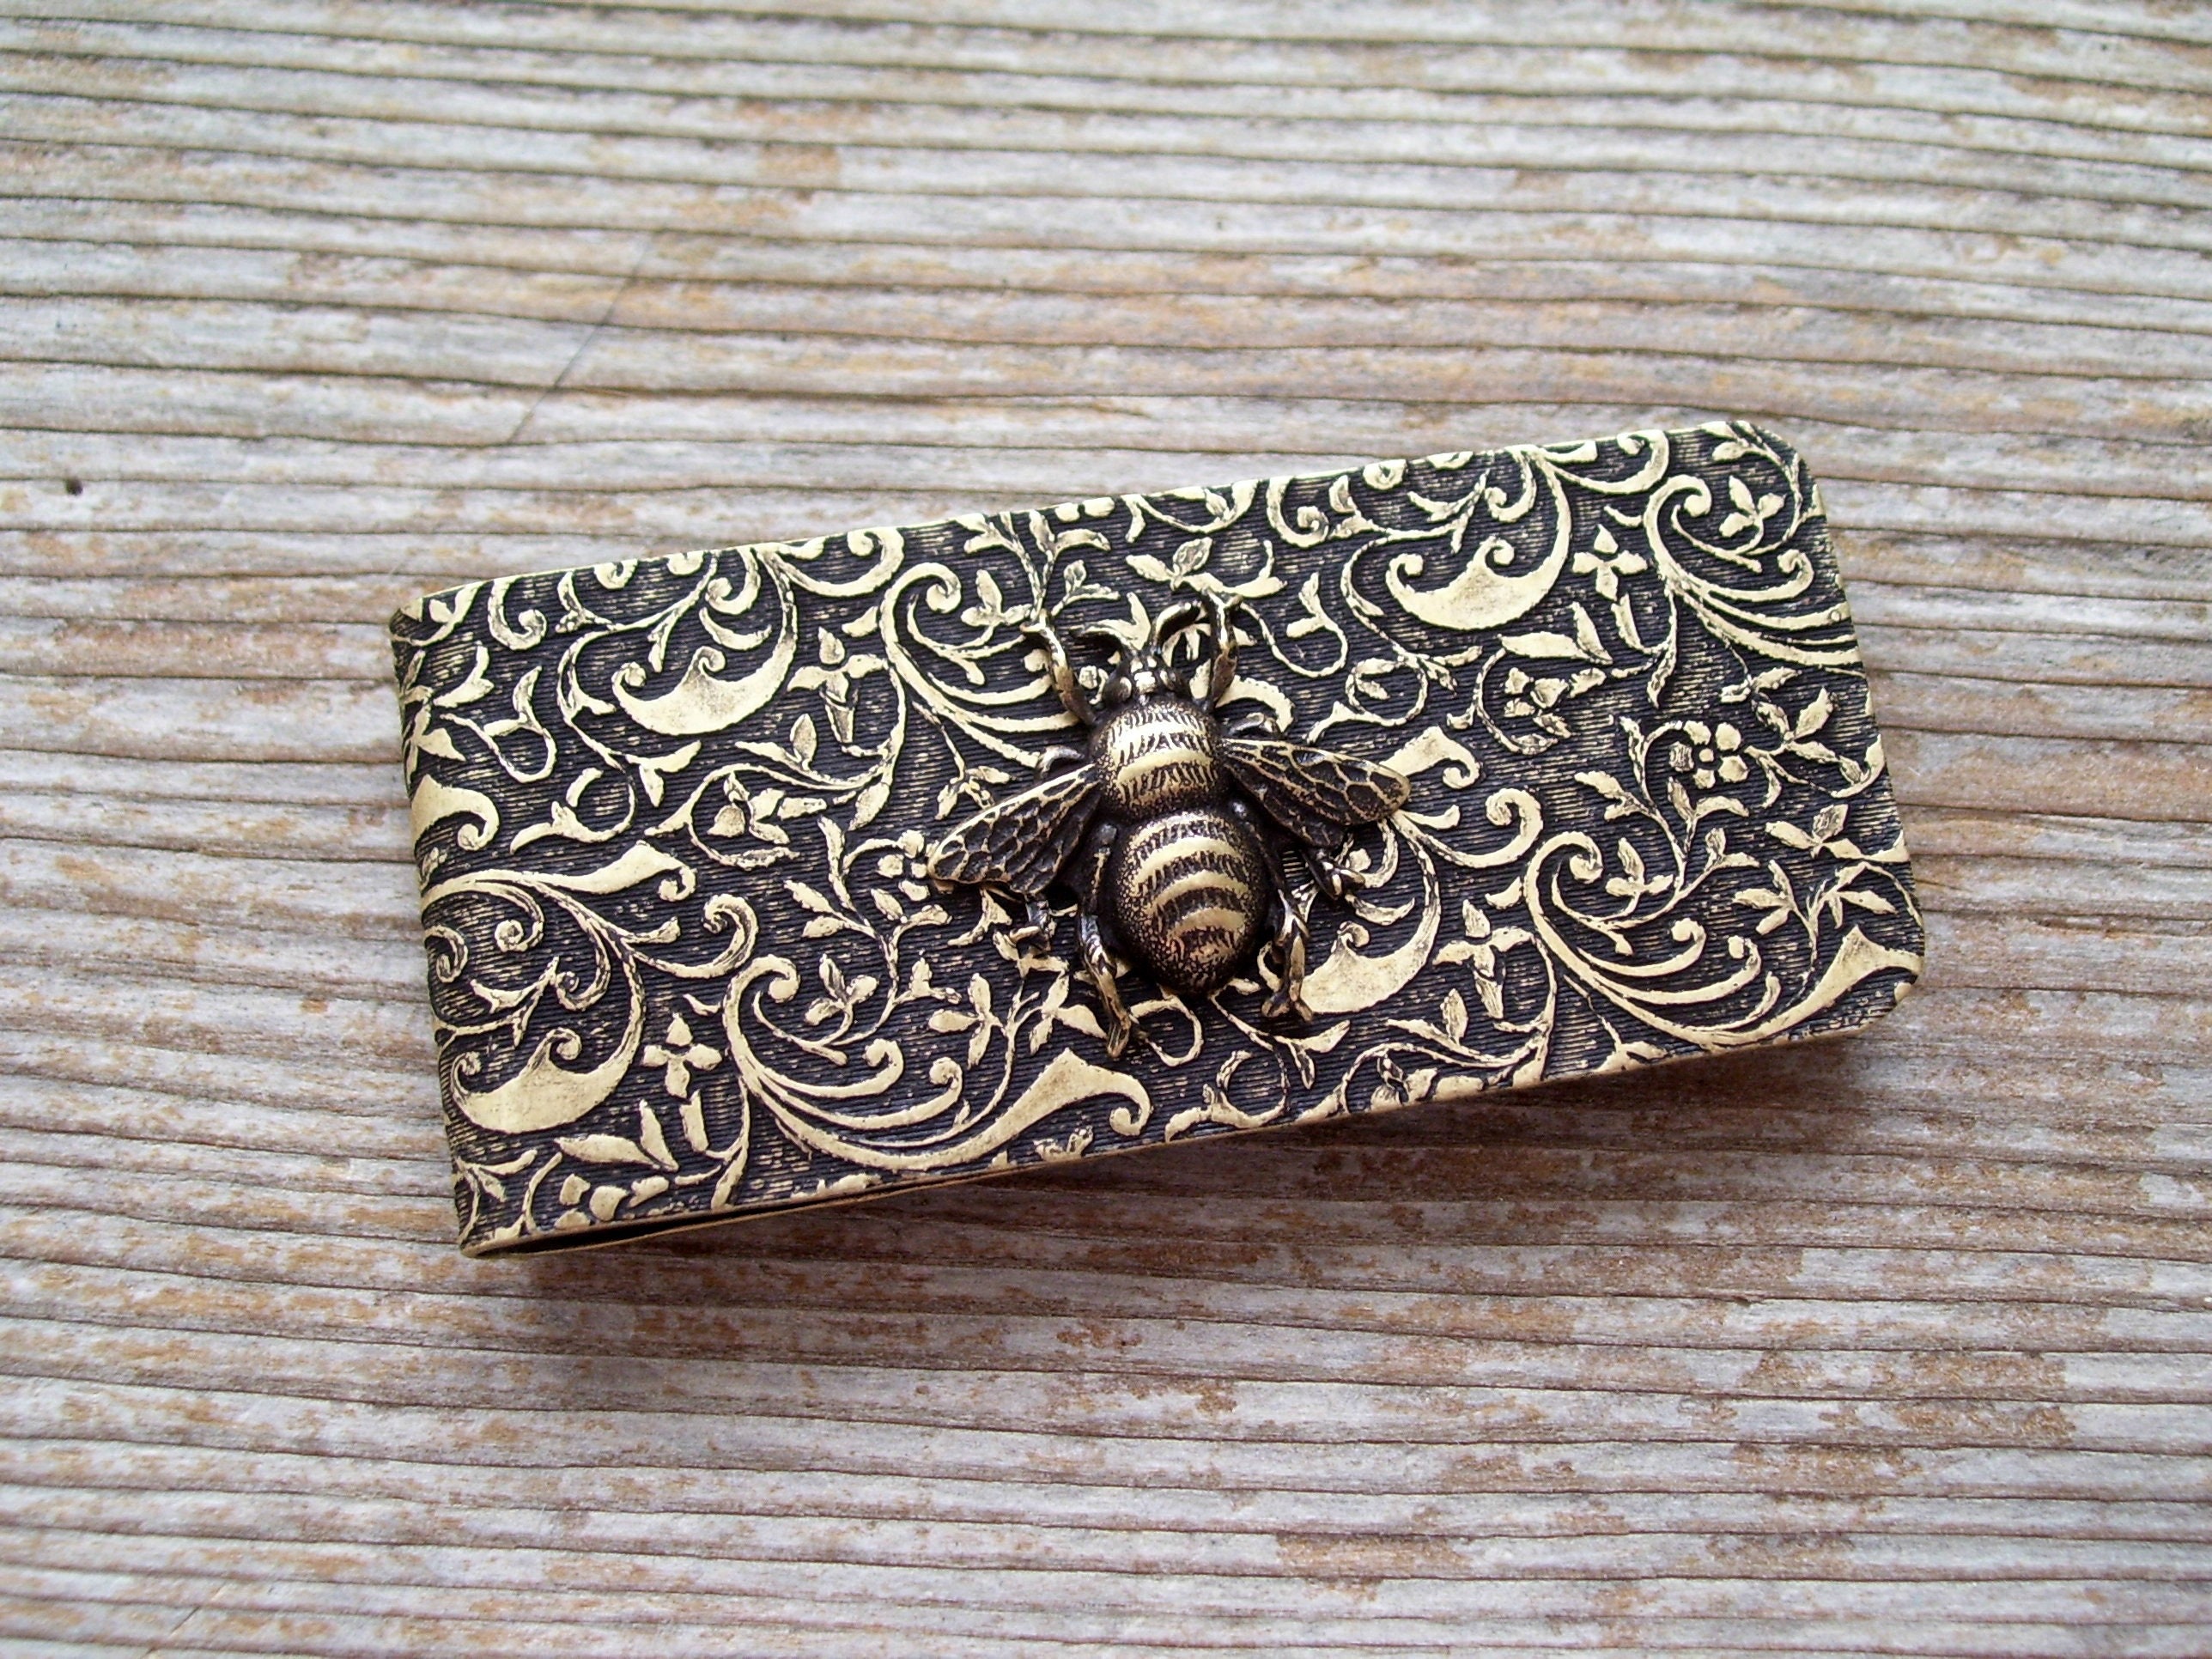 Gucci Sterling Silver Logo and Bee Motif Money Clip